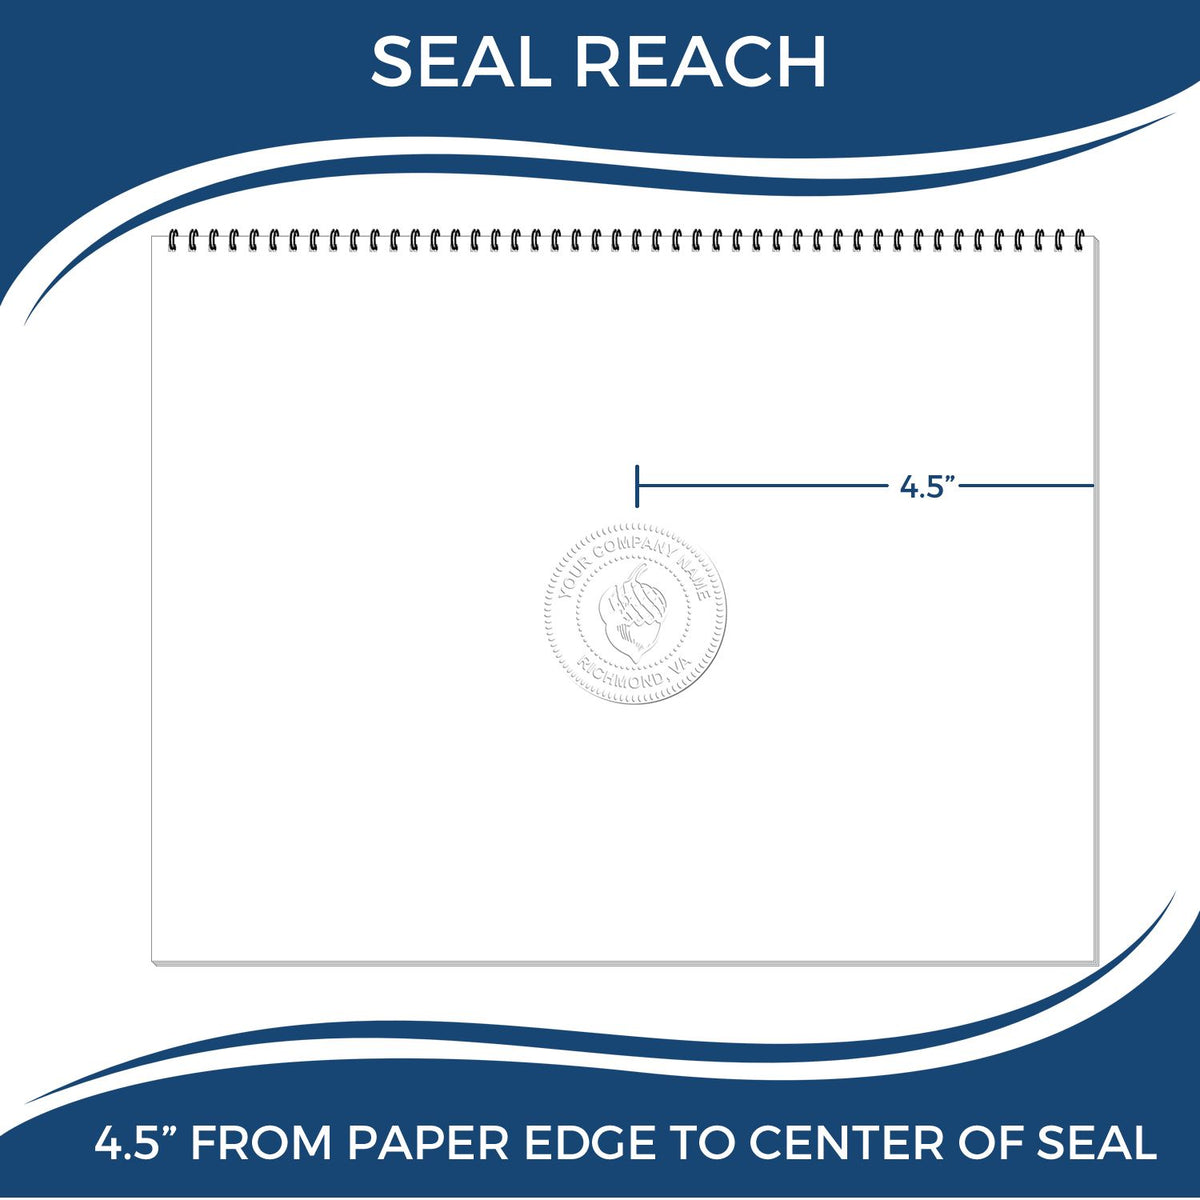 An infographic showing the seal reach which is represented by a ruler and a miniature seal image of the State of Virginia Extended Long Reach Engineer Seal